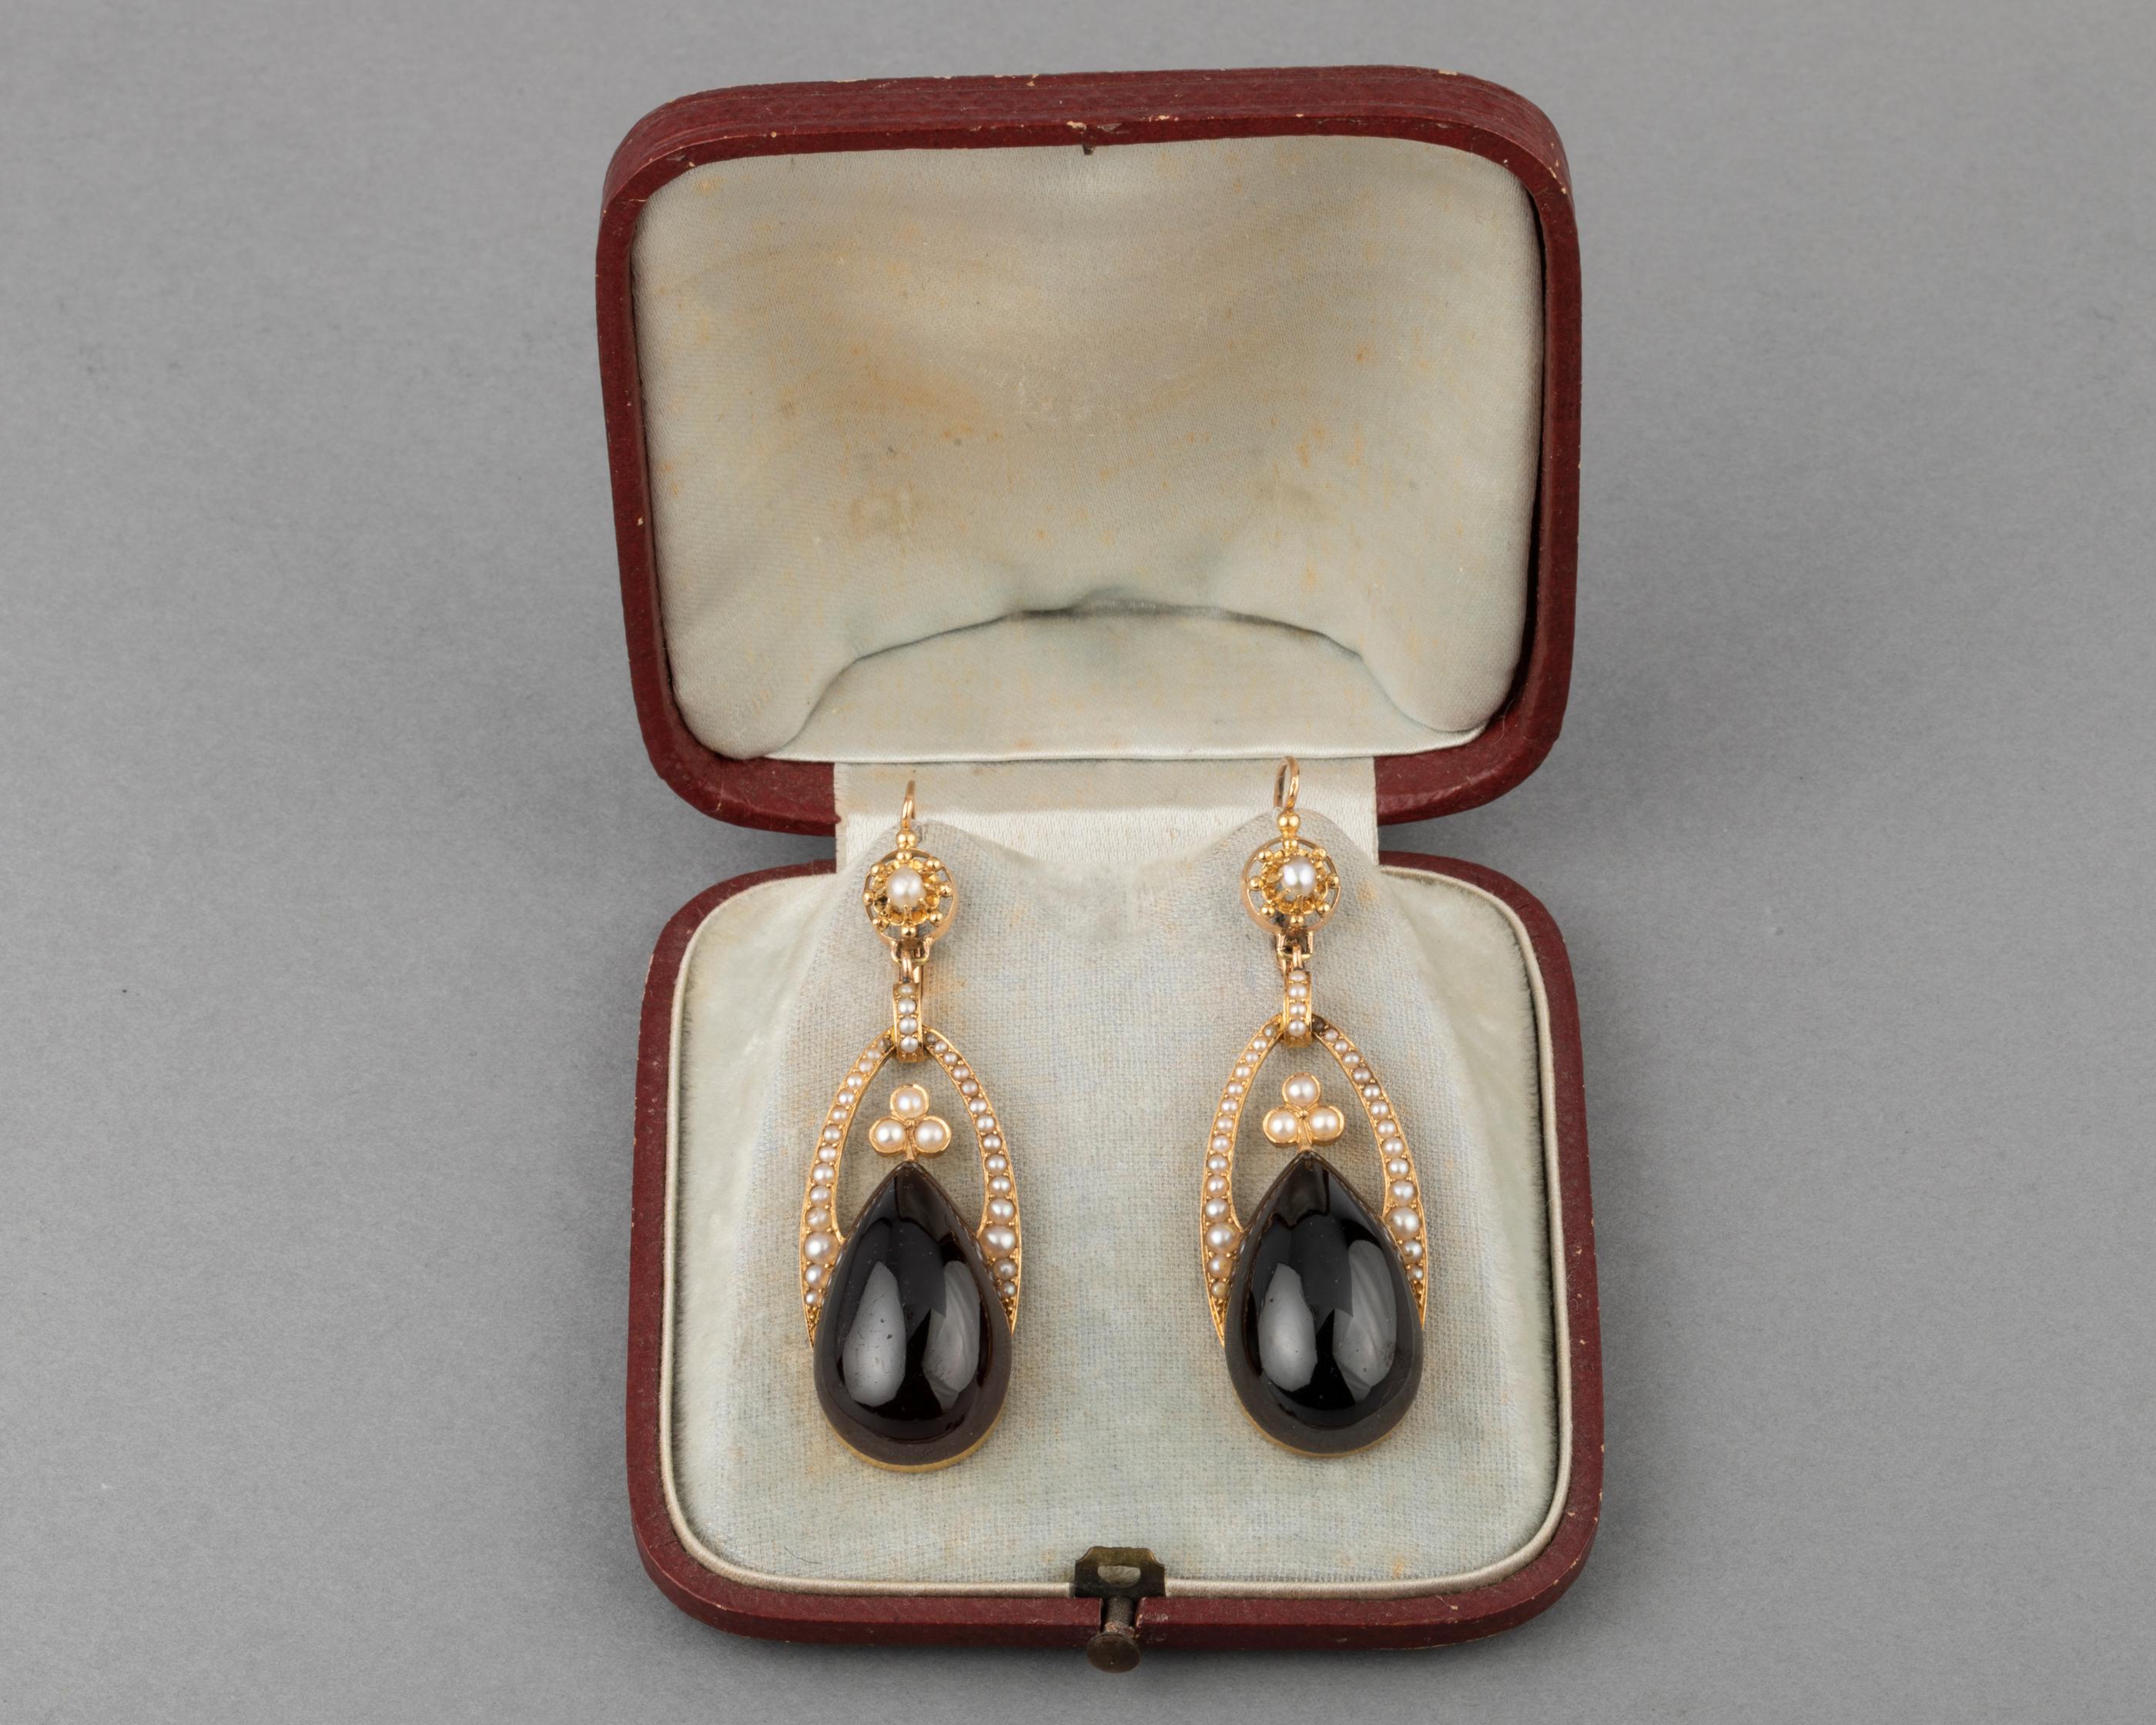 Antique God Garnets and Pearls Earrings

Very beautiful pair of antique earrings. French made circa 1870. They sit in their orignal boxe.
Made in rose gold 18k (two eagle head marks).  Set with two red garnets and titles fine pearls. They have